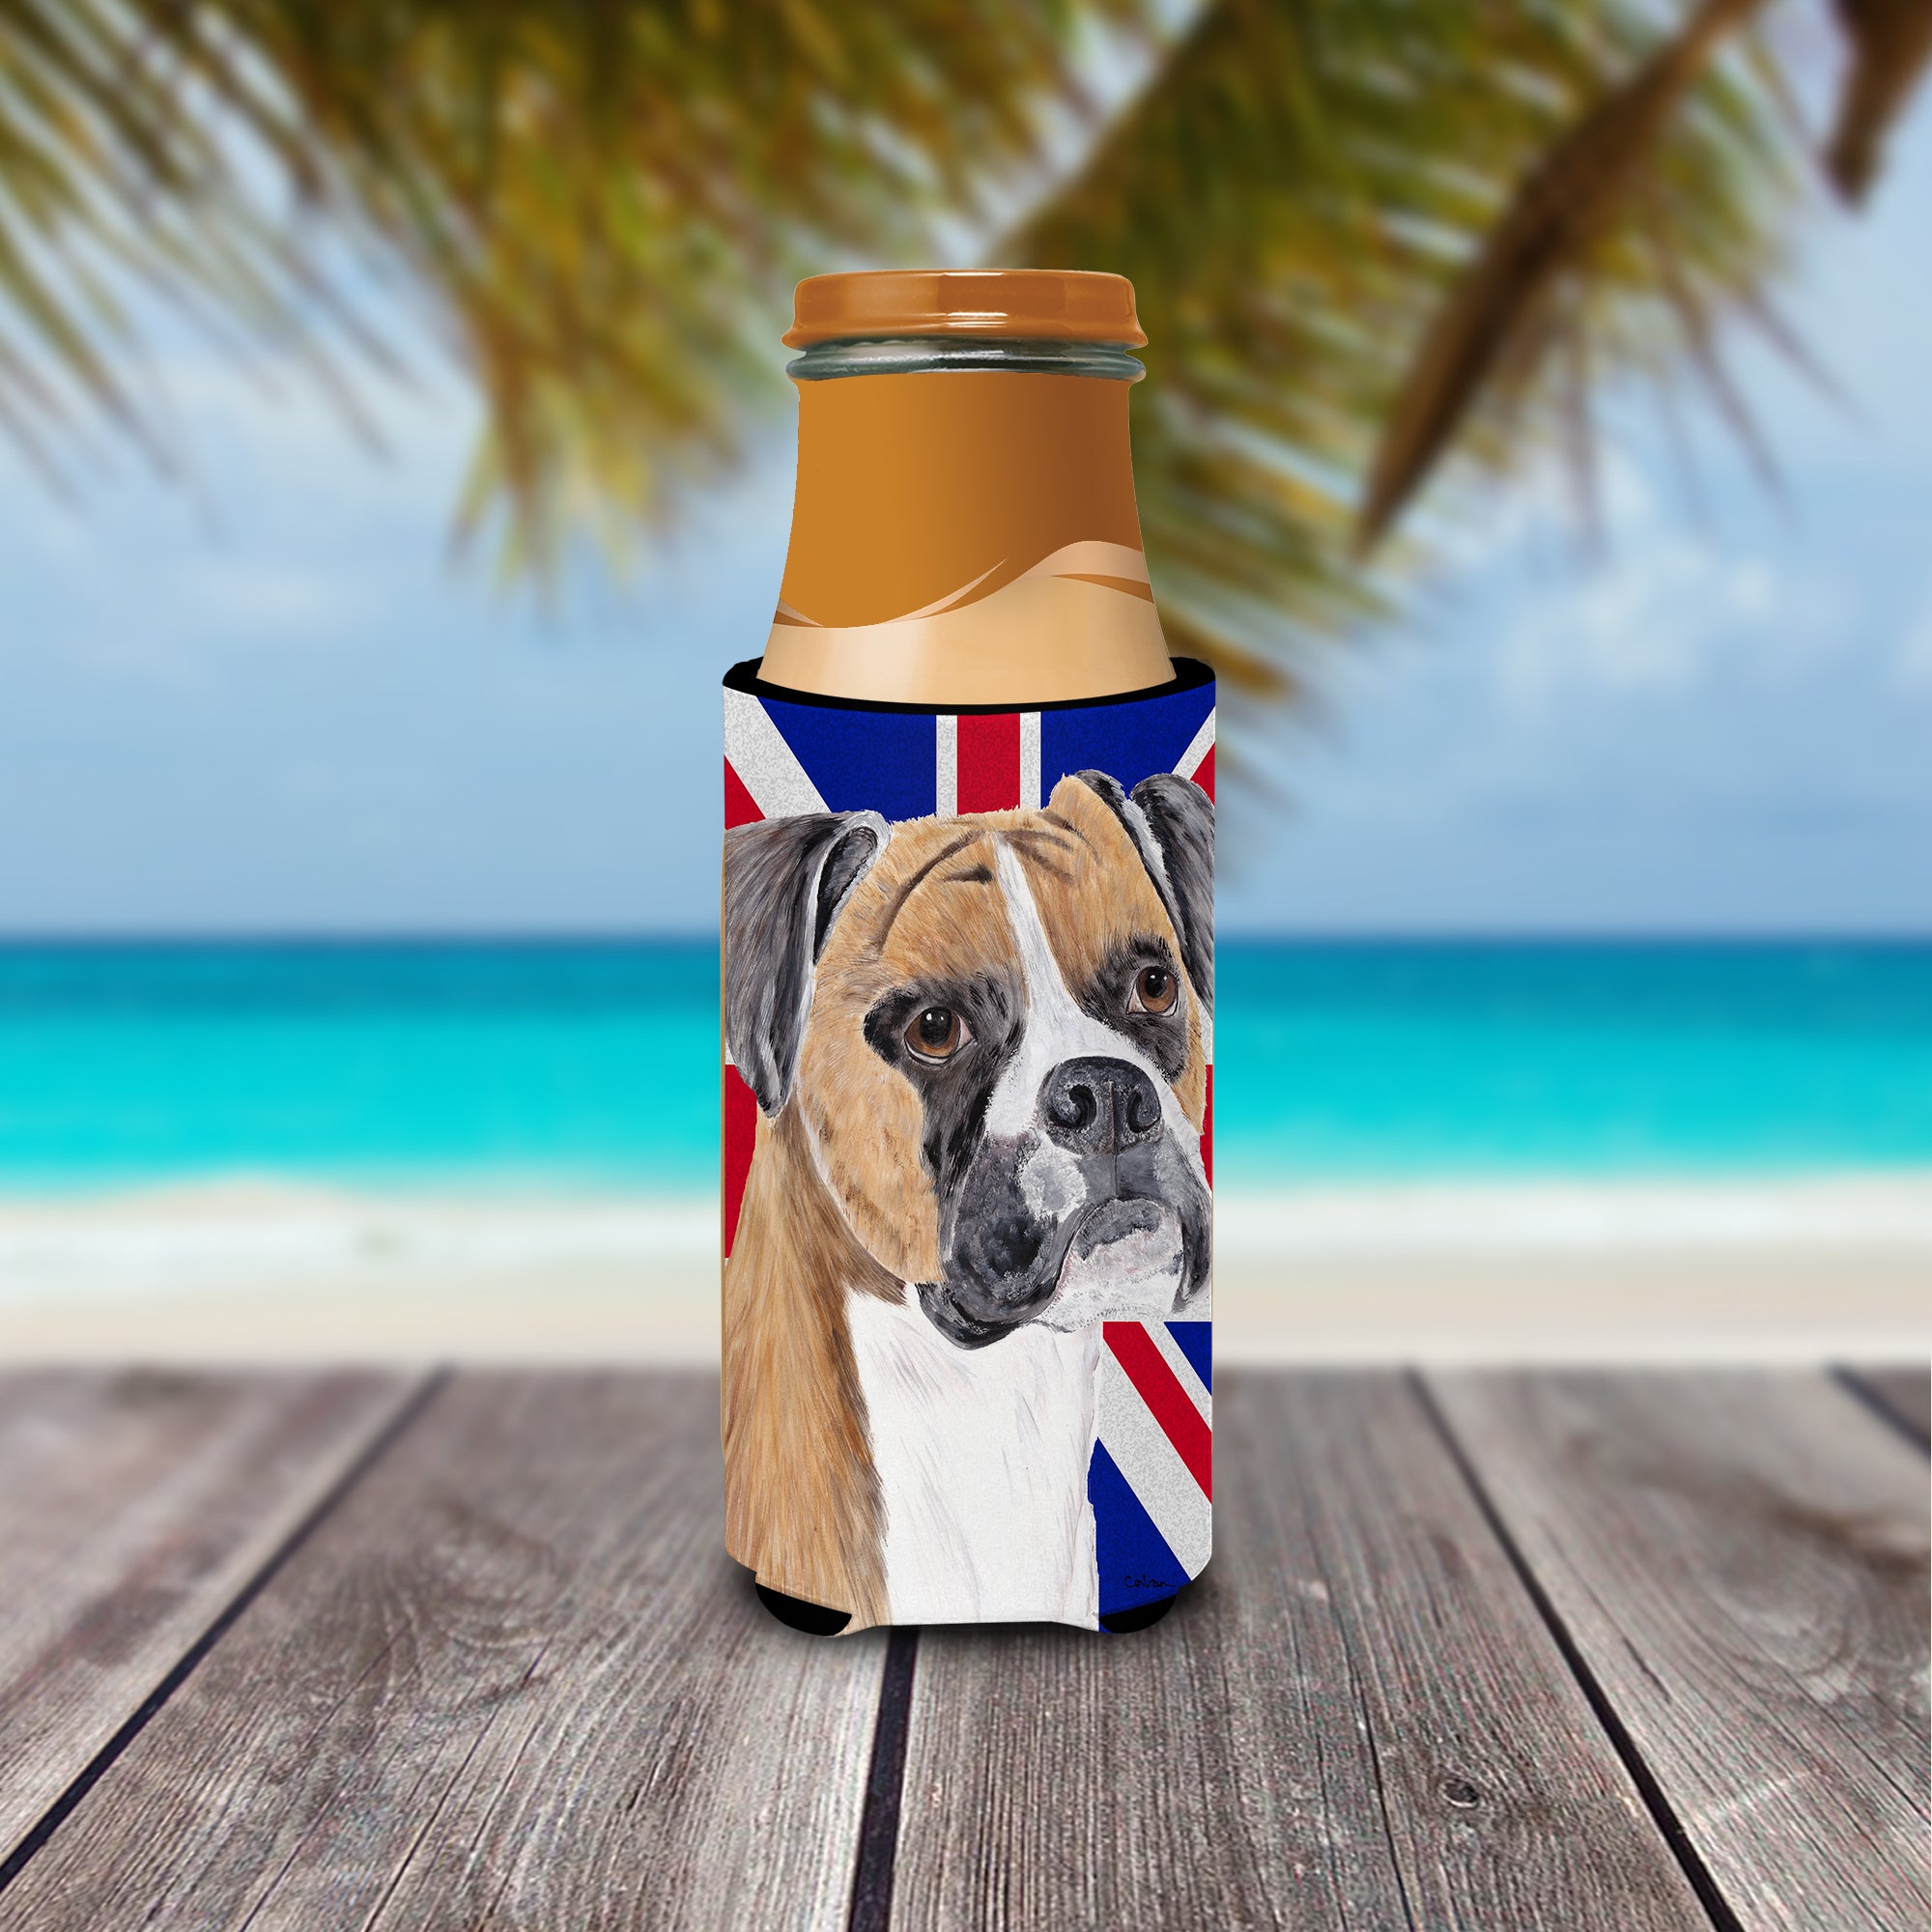 Boxer with English Union Jack British Flag Ultra Beverage Insulators for slim cans SC9847MUK.